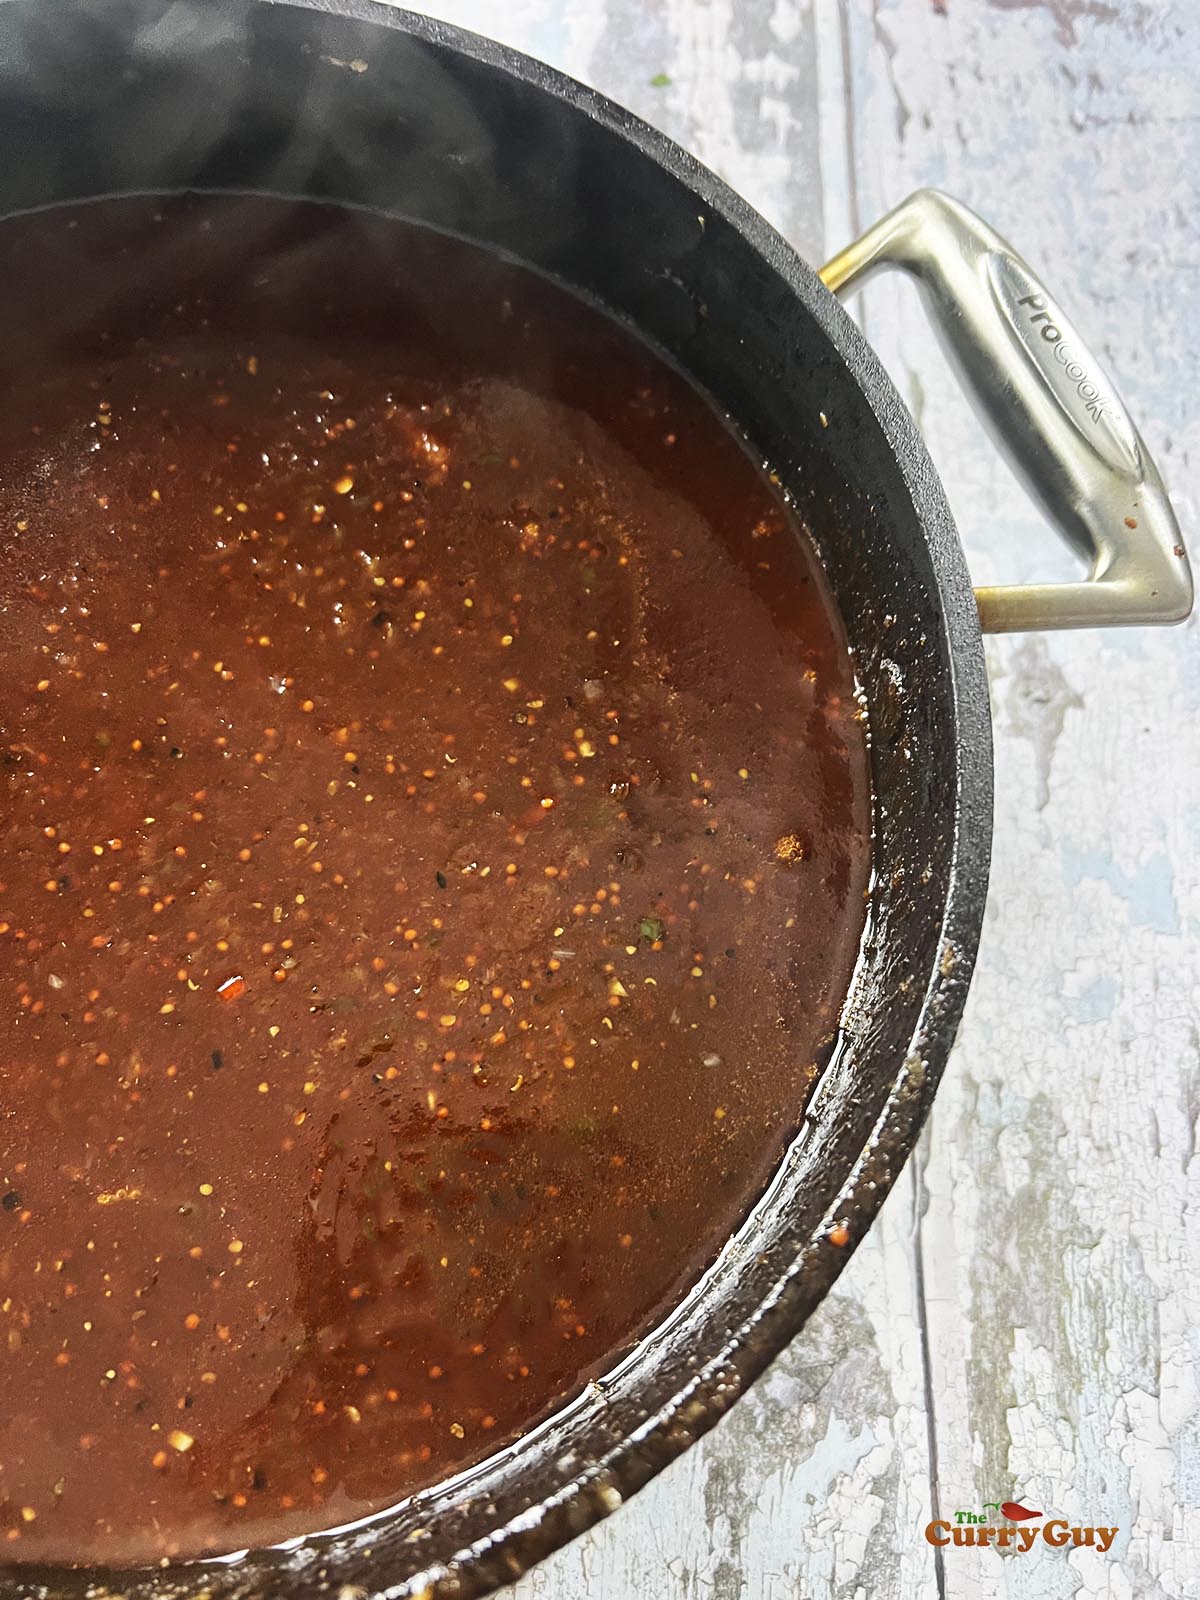 The finished barbecue sauce recipe